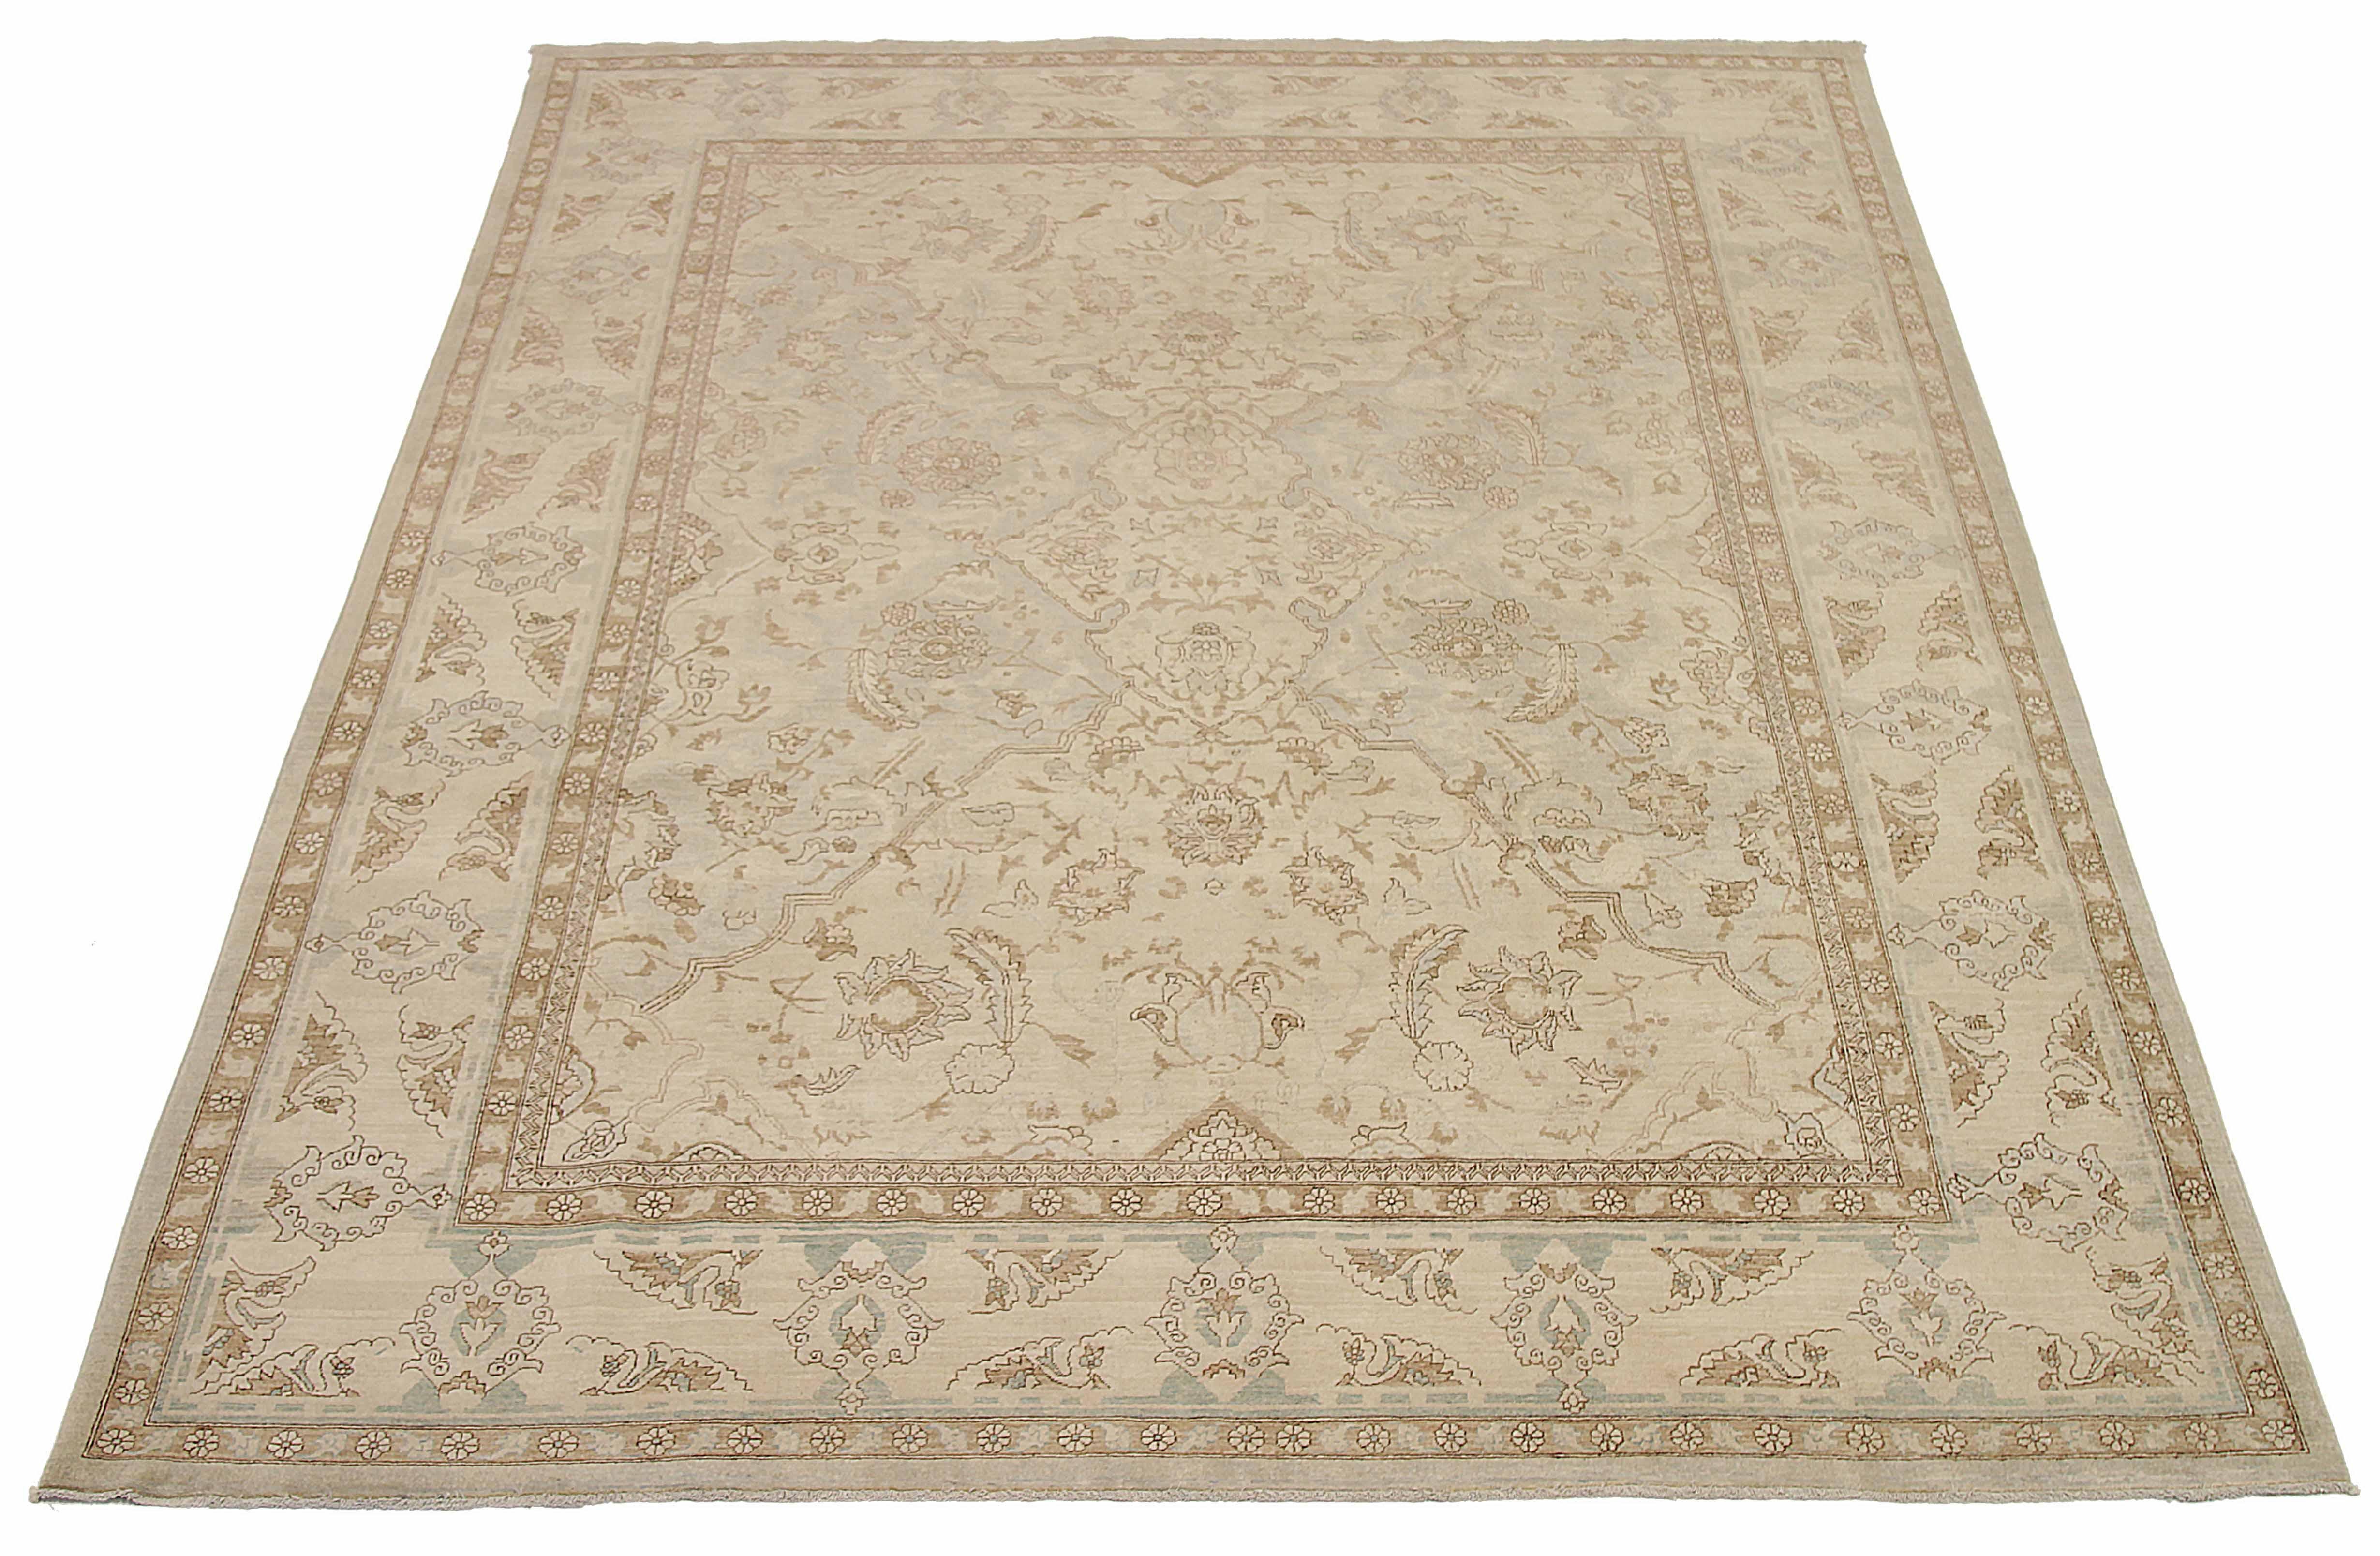 New Afghan area rug handwoven from the finest sheep’s wool. It’s colored with all-natural vegetable dyes that are safe for humans and pets. It’s a traditional Haji Jalili design handwoven by expert artisans. It’s a lovely area rug that can be